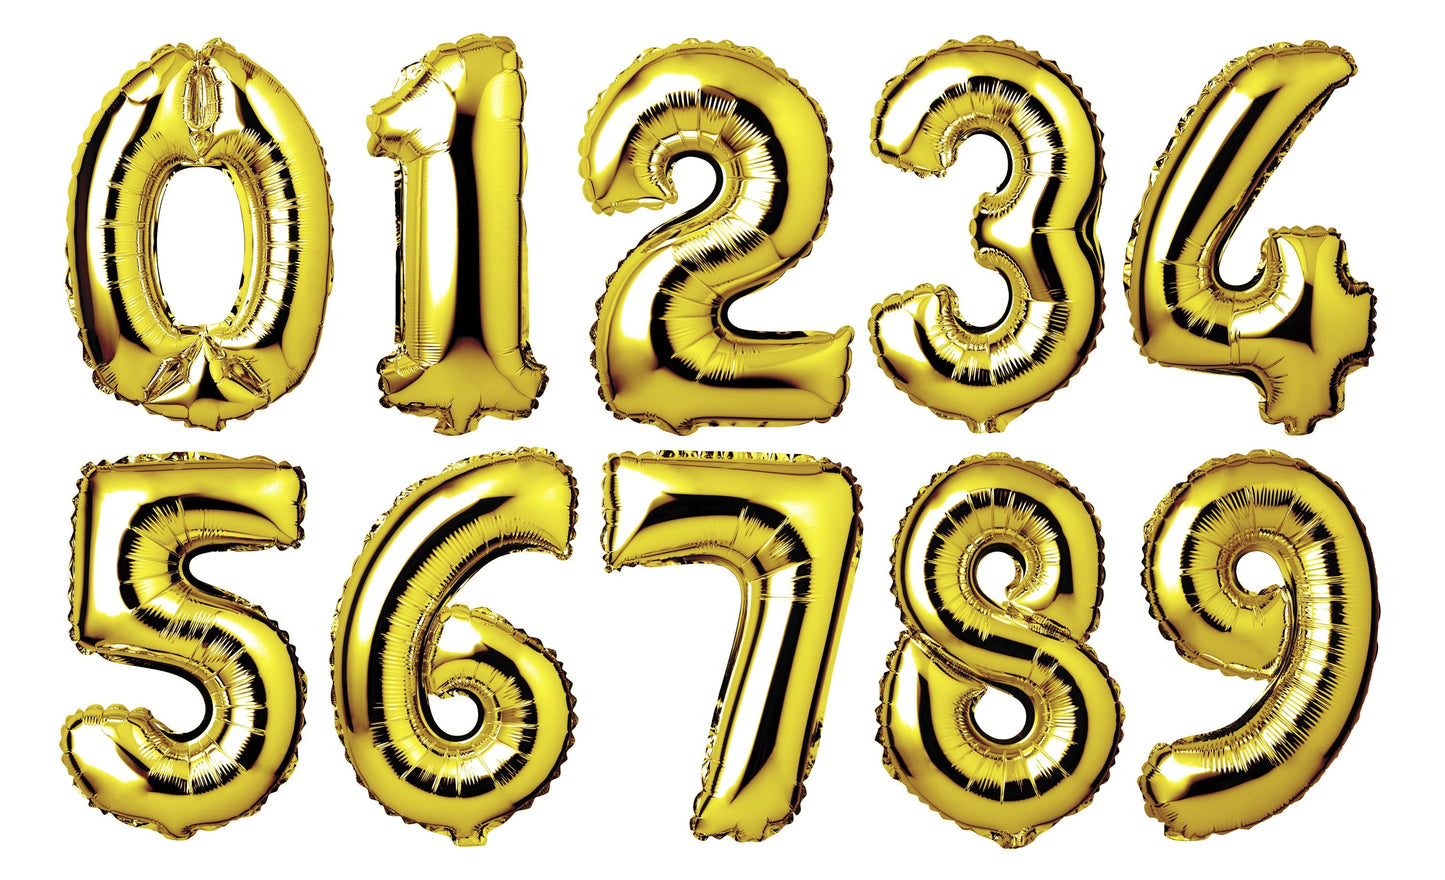 34" Giant Foil Gold Number 2 Balloon